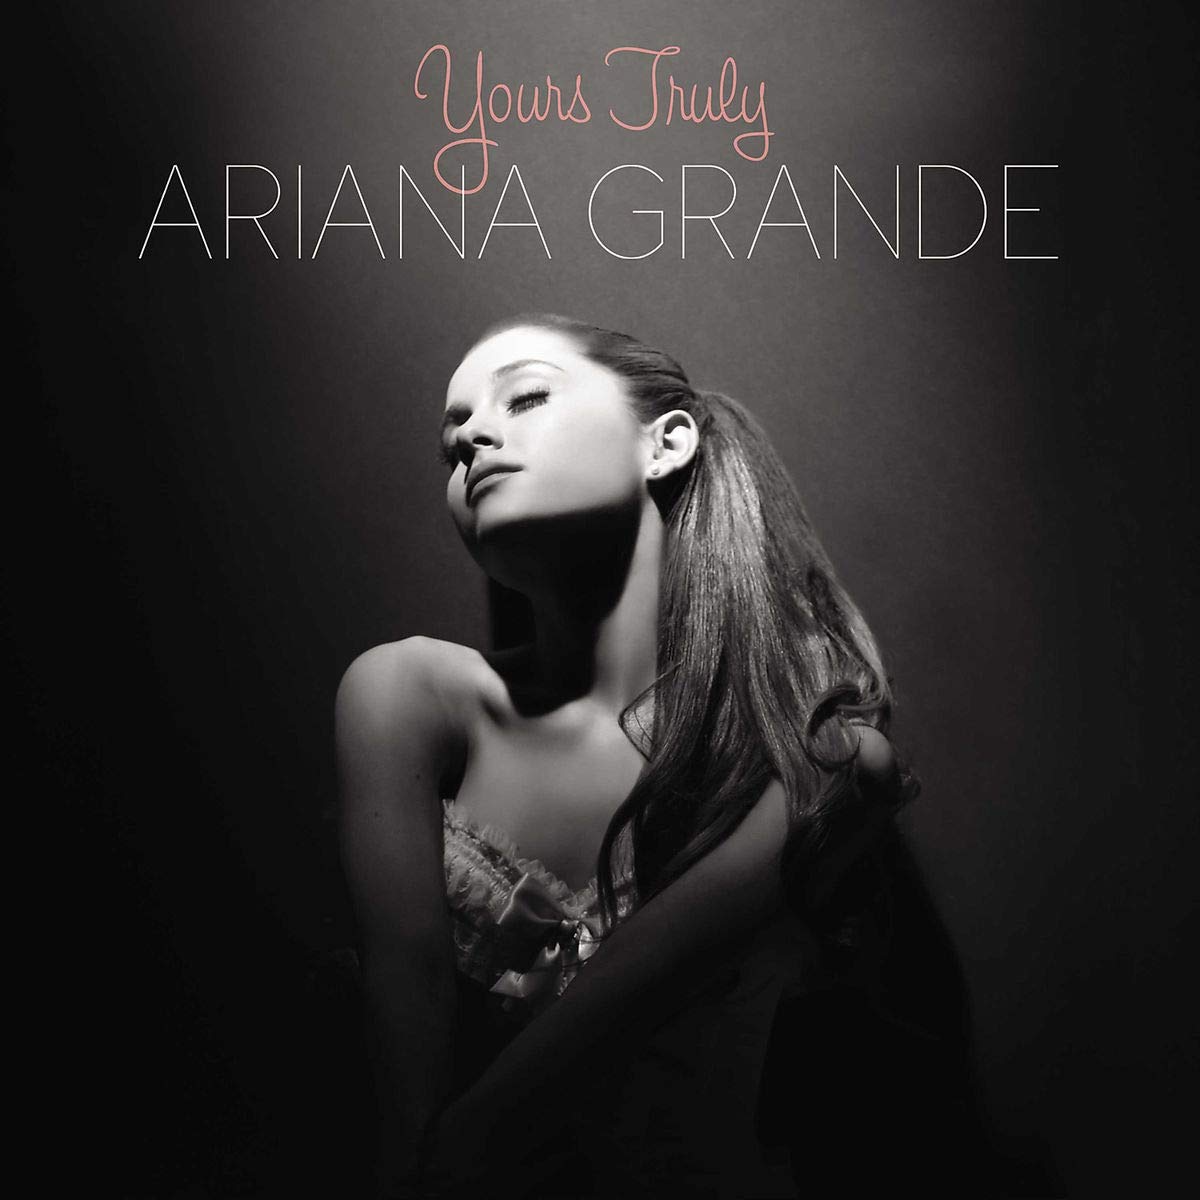 CD Shop - GRANDE ARIANA YOURS TRULY